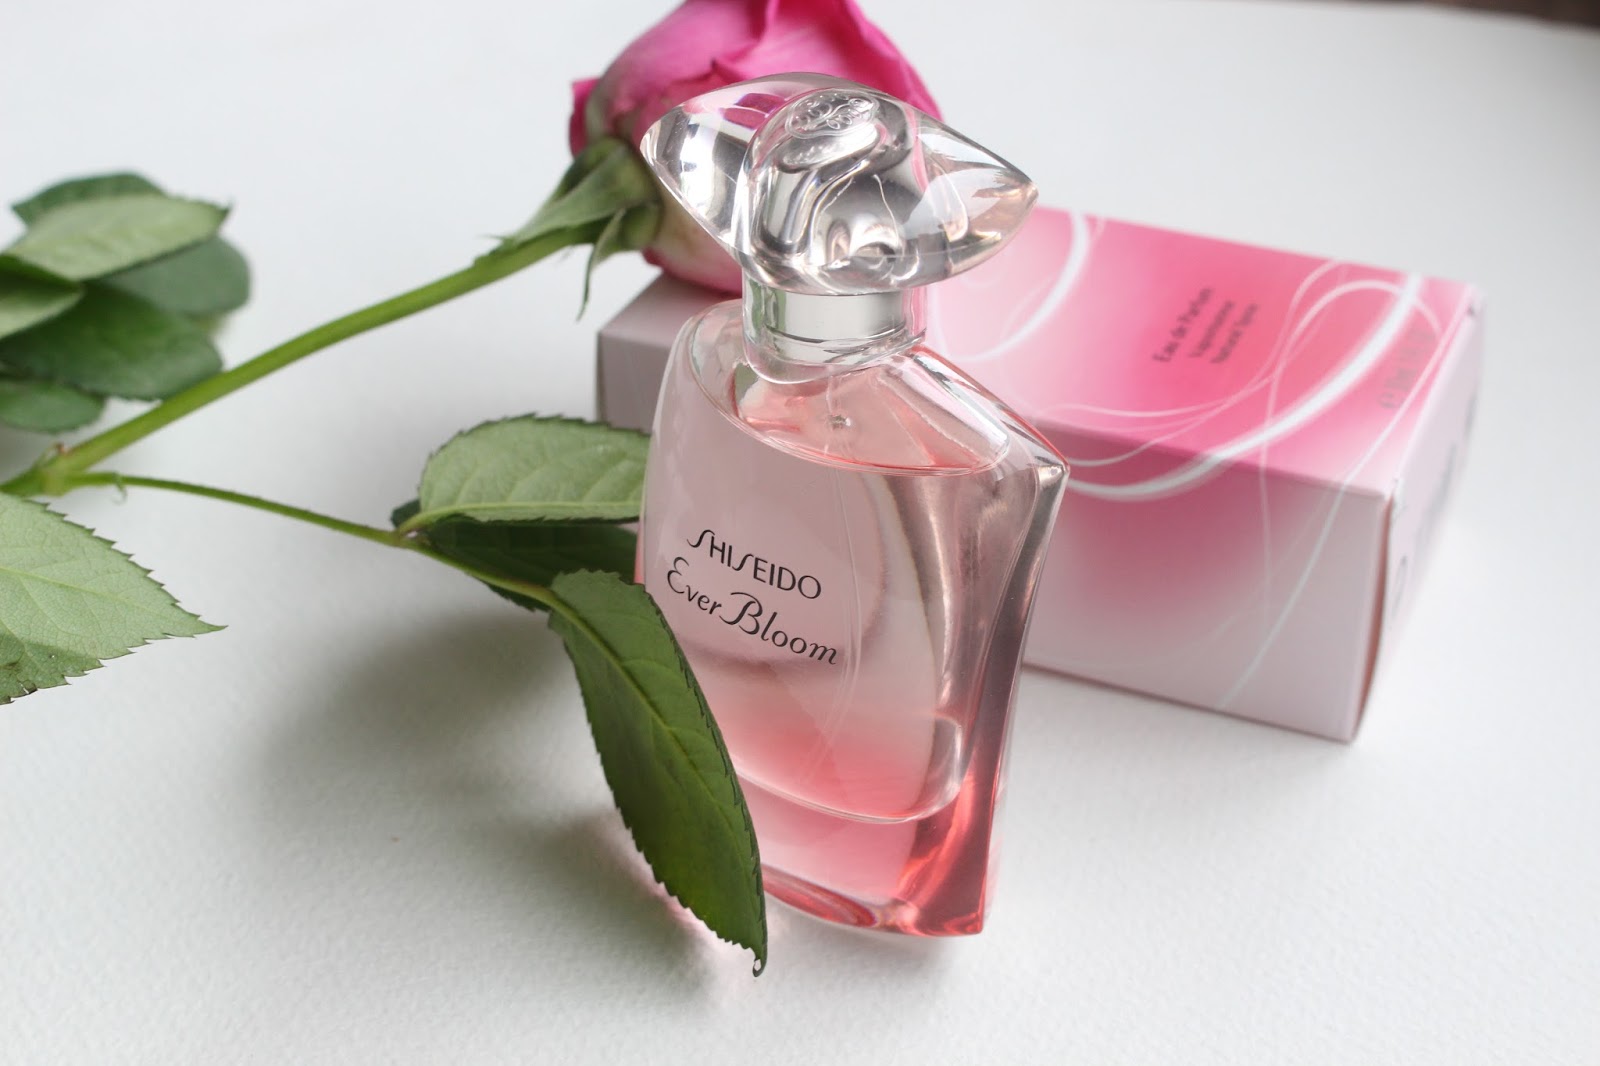 A first look at Ever Bloom by Shiseido